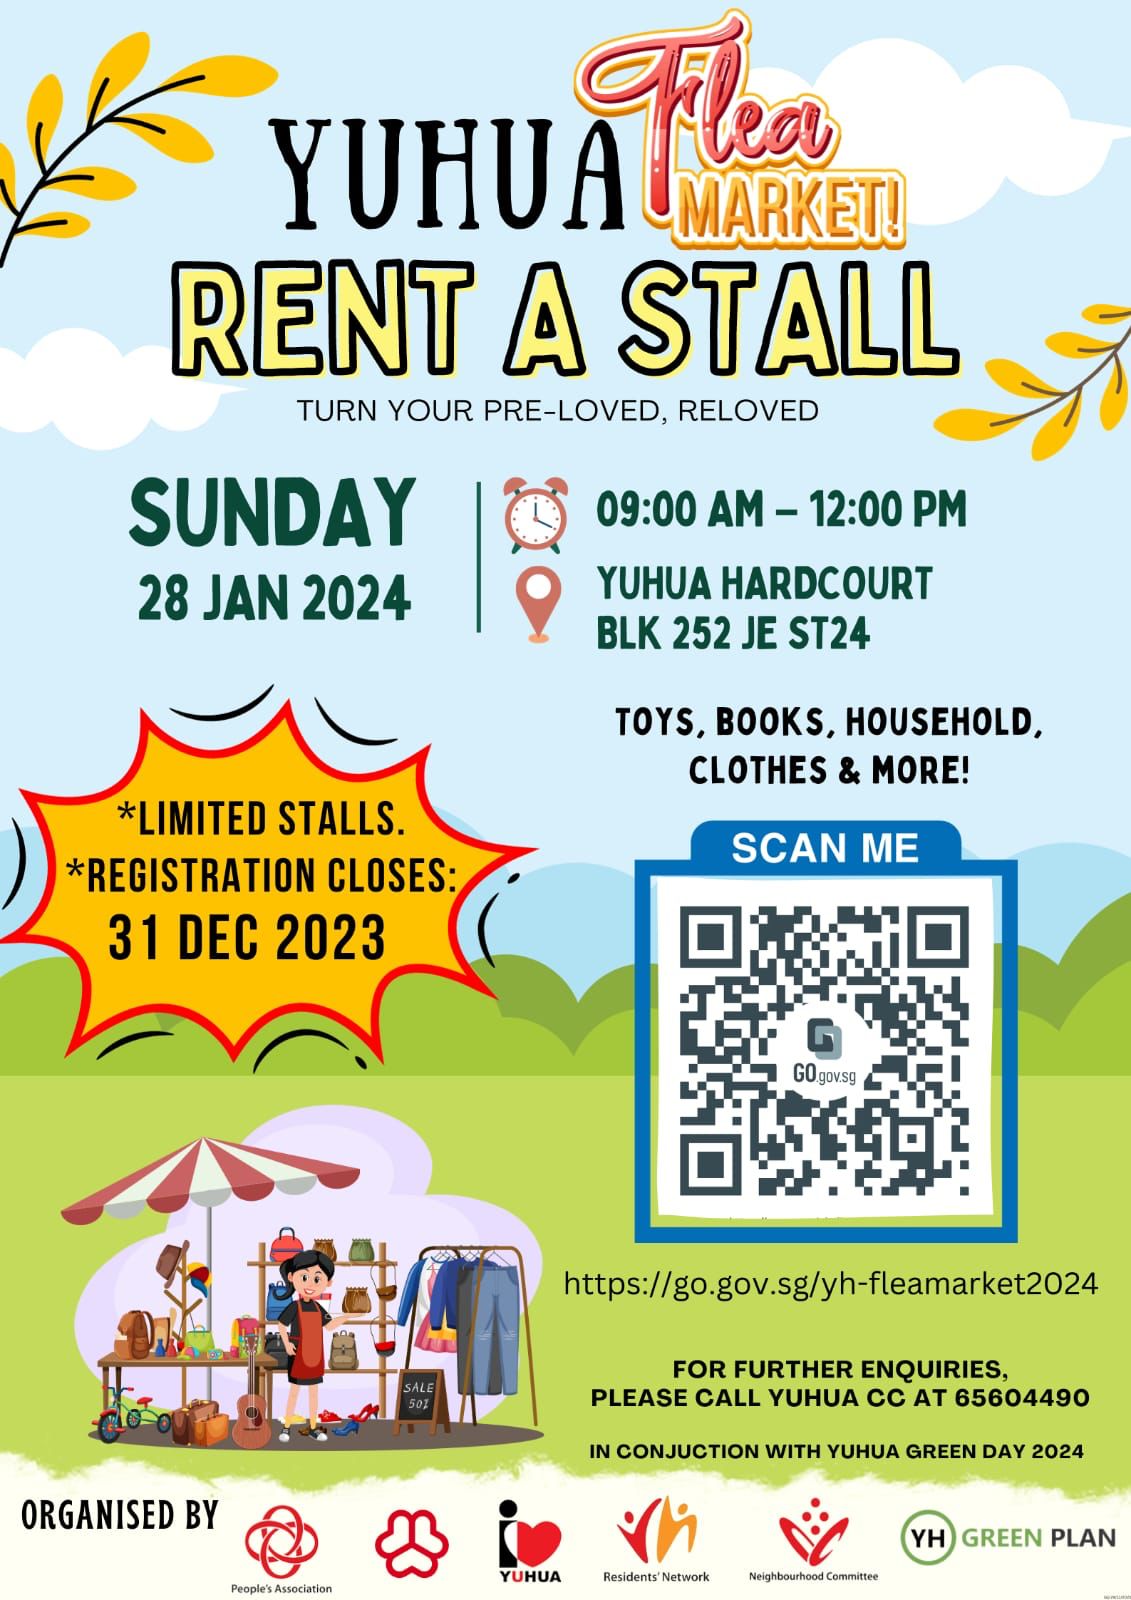 Yuhua Green Day Flea Market - Rent a Stall 2024's Banner Image